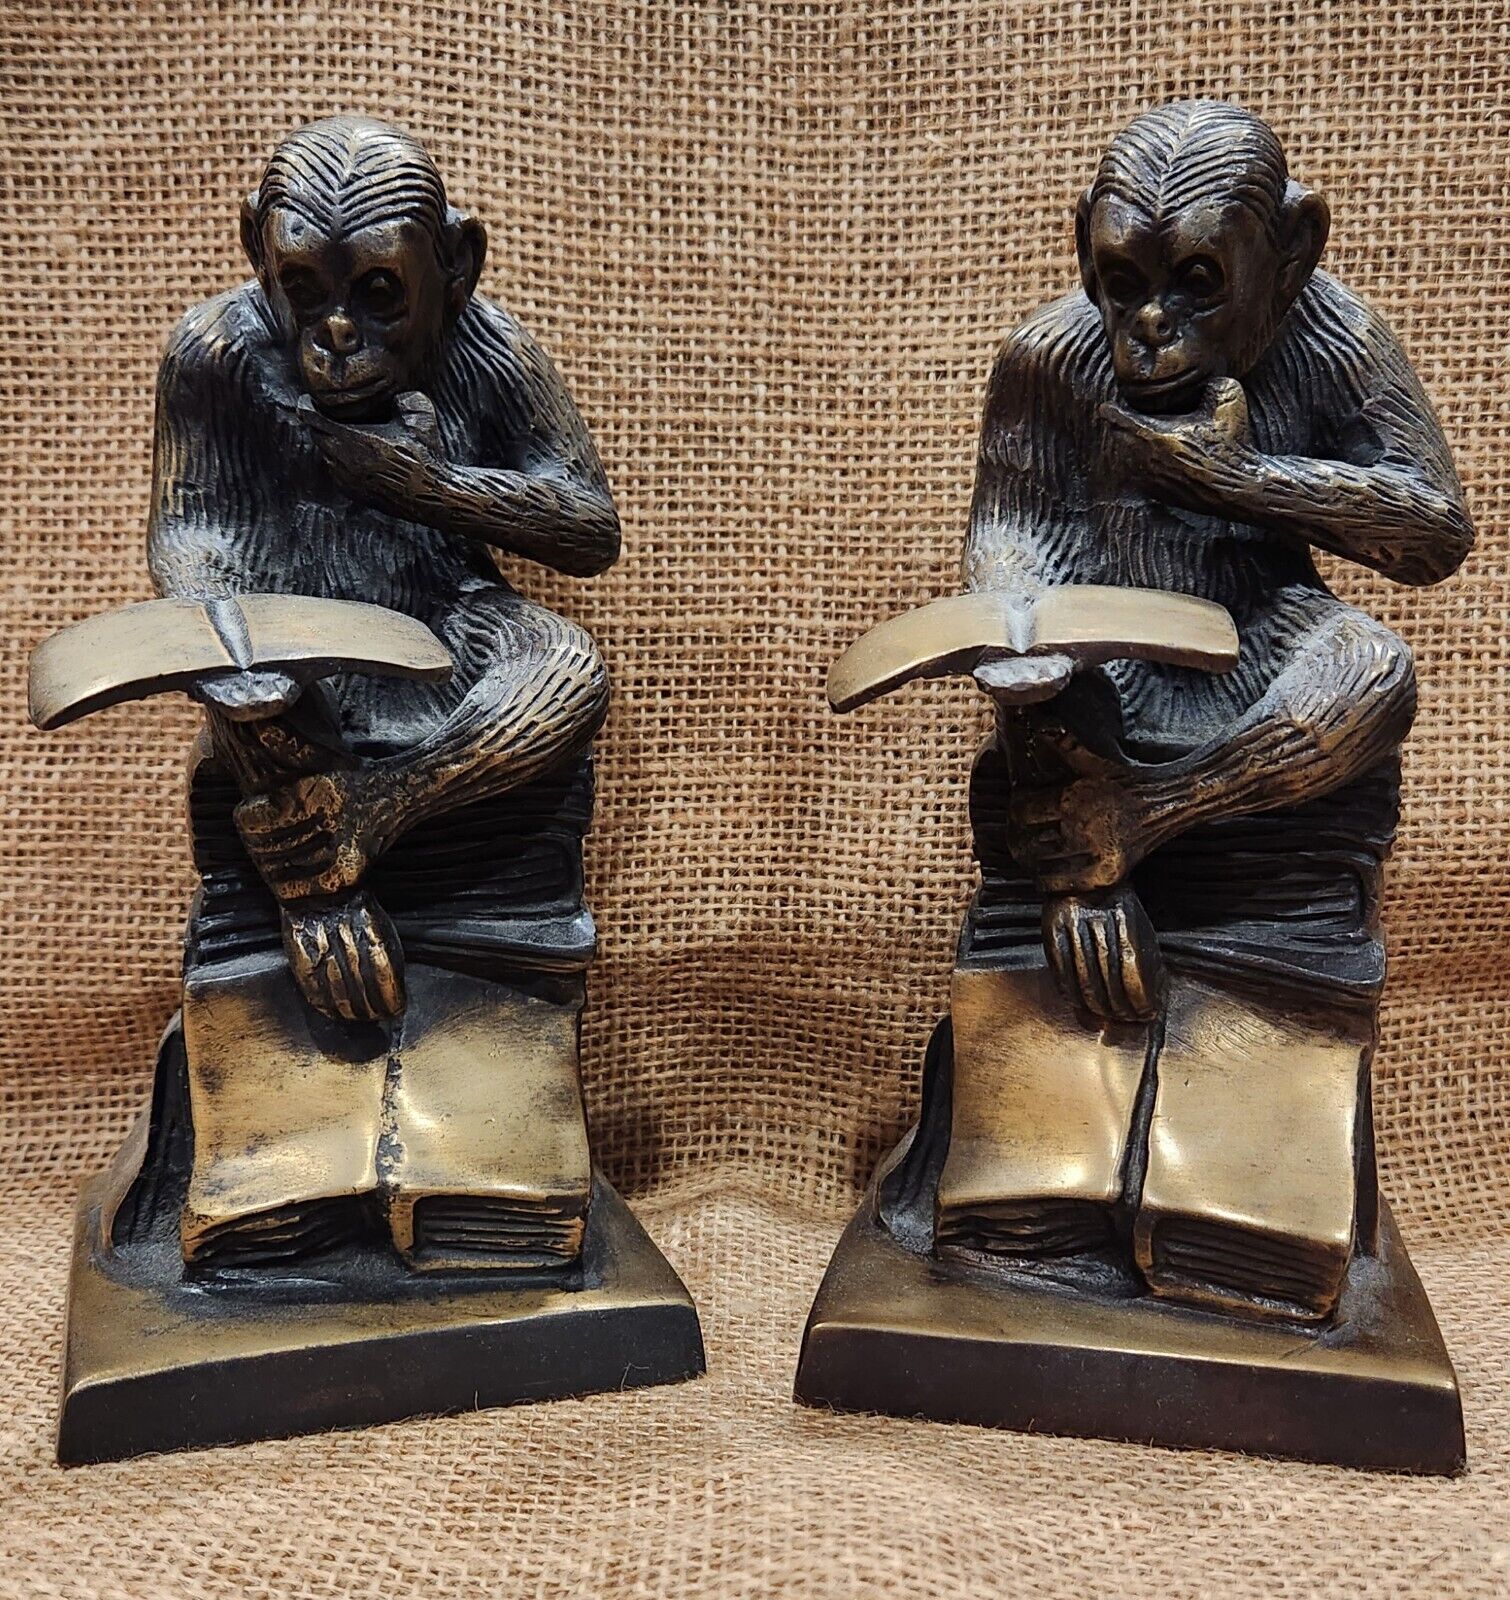 Brass Monkeys Reading Book Figurines Statues Bookends Vtg Set of 2 Made in India